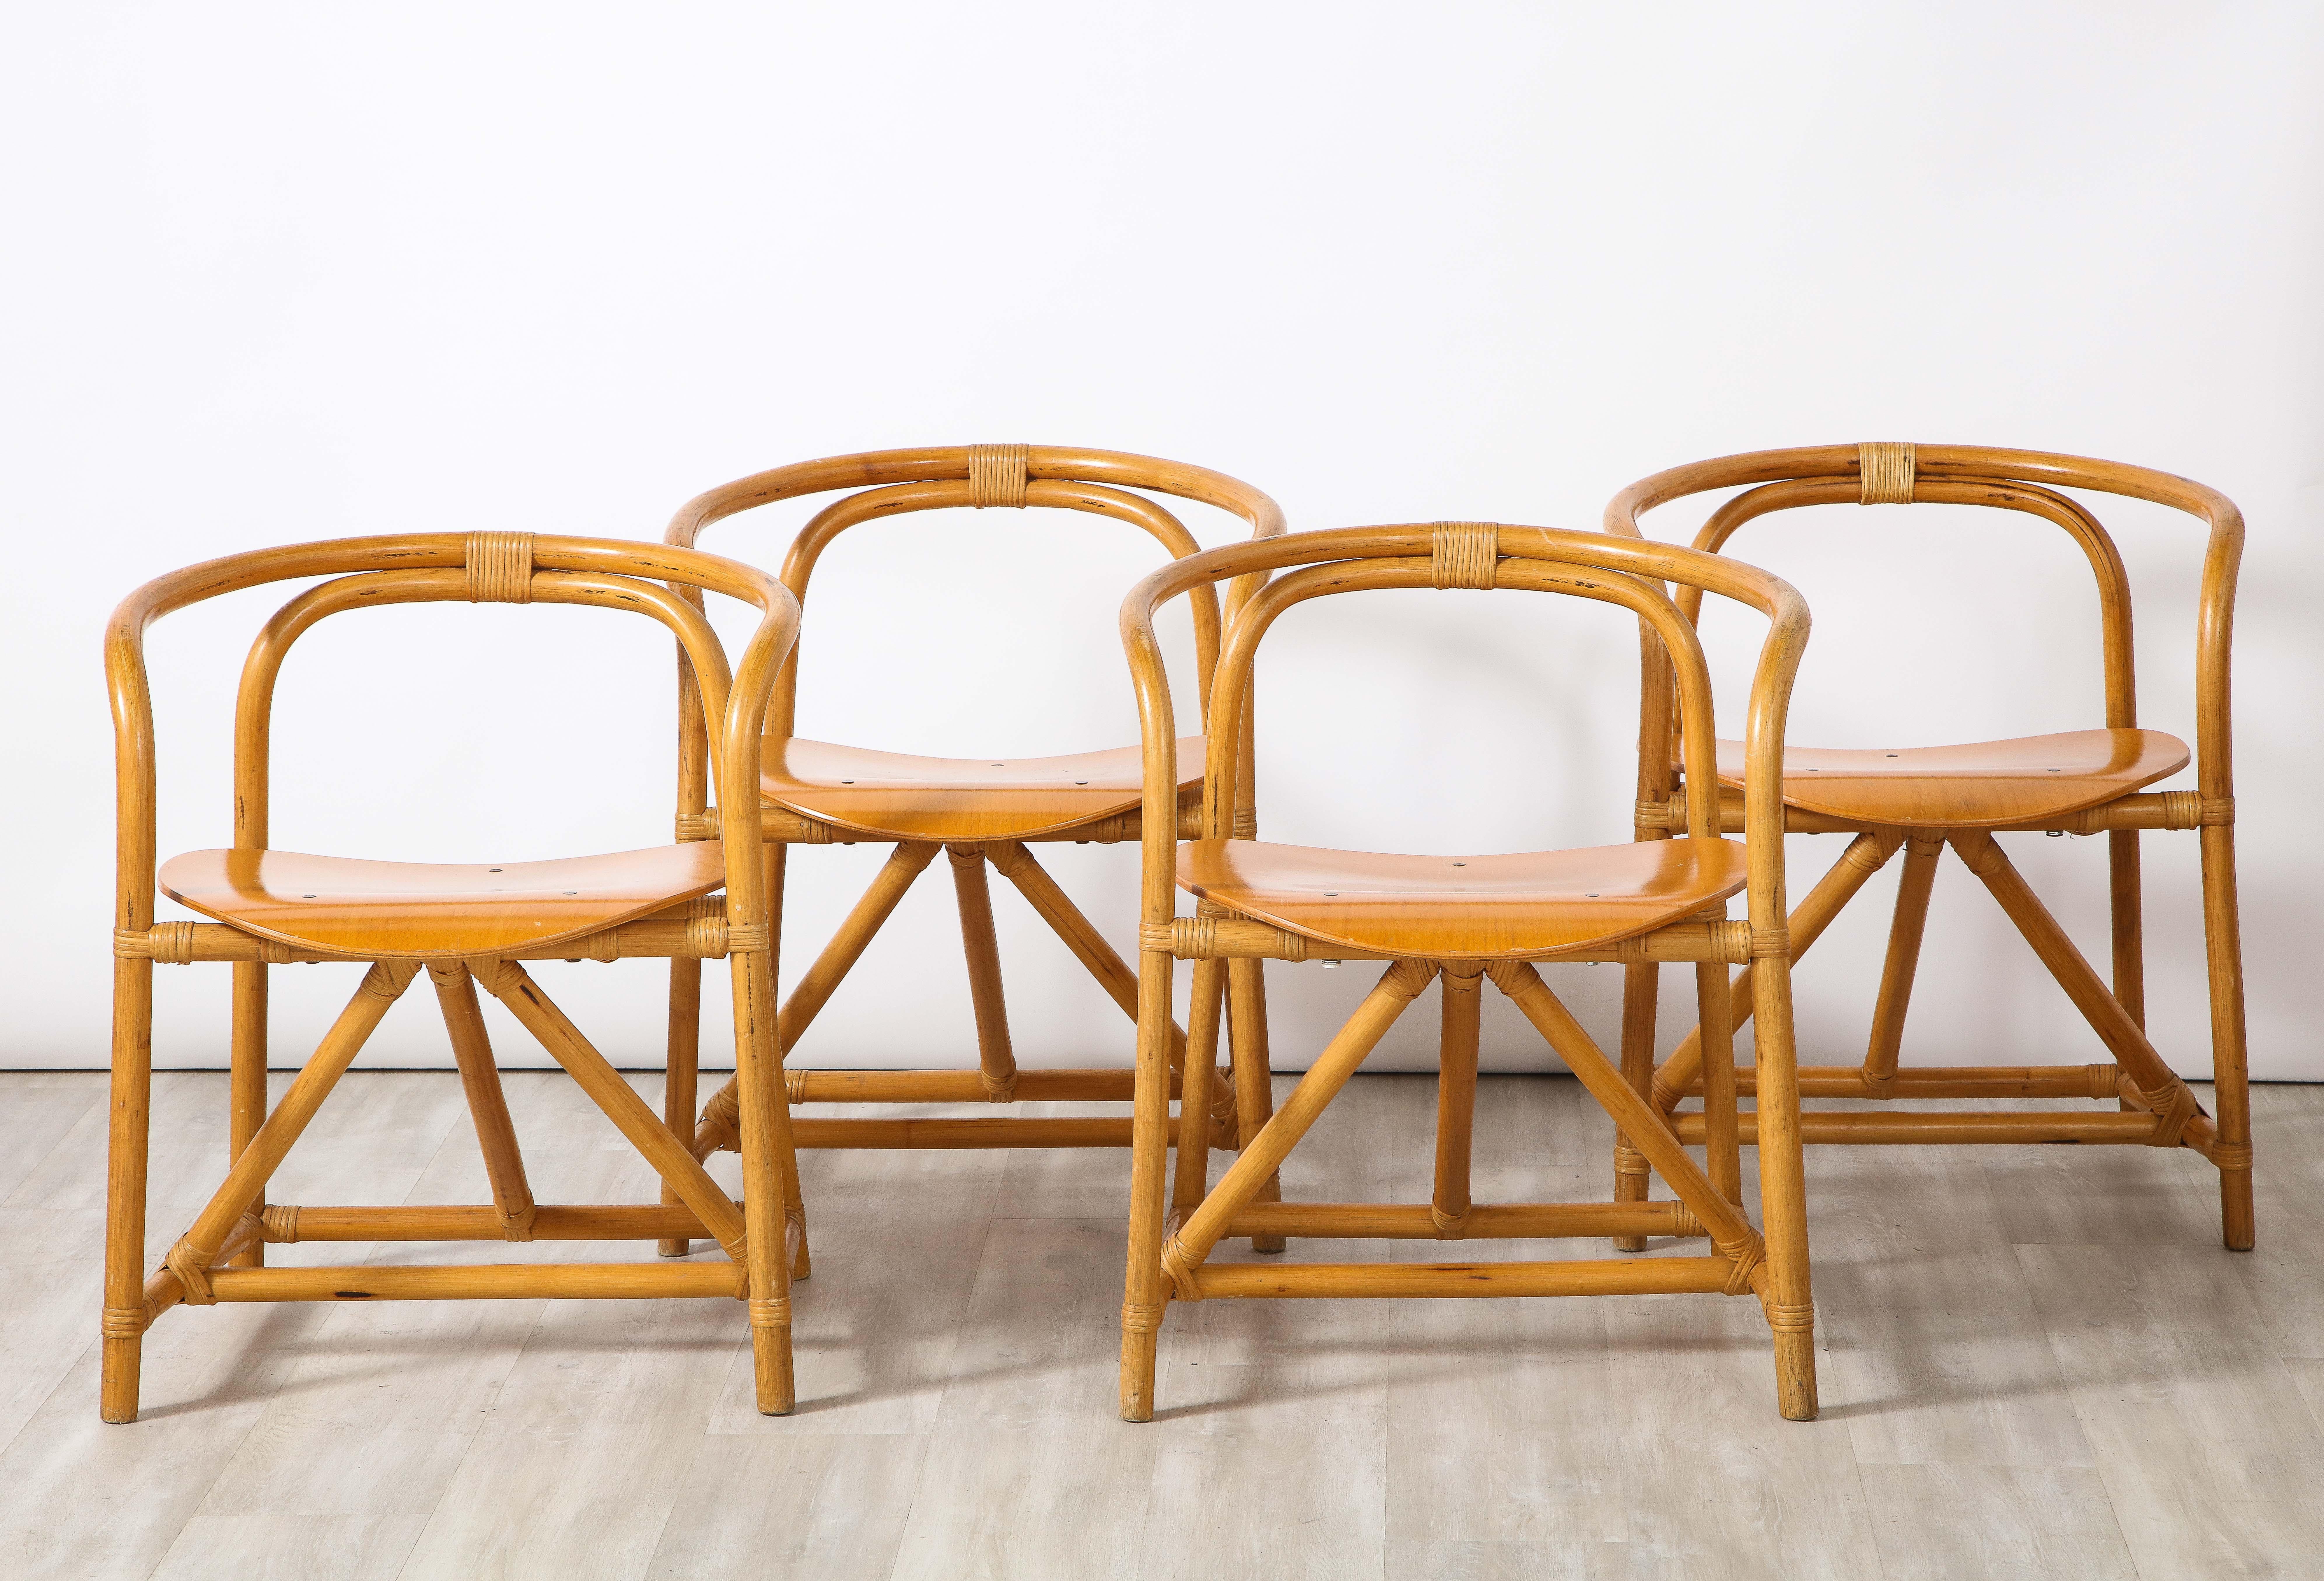 A charming set of four Italian bamboo and wood dining chairs, with curvilinear arms and circular bentwood seat supported by a cross-stretcher and V design.
Italian, circa 1960.
Size: 27 1/2